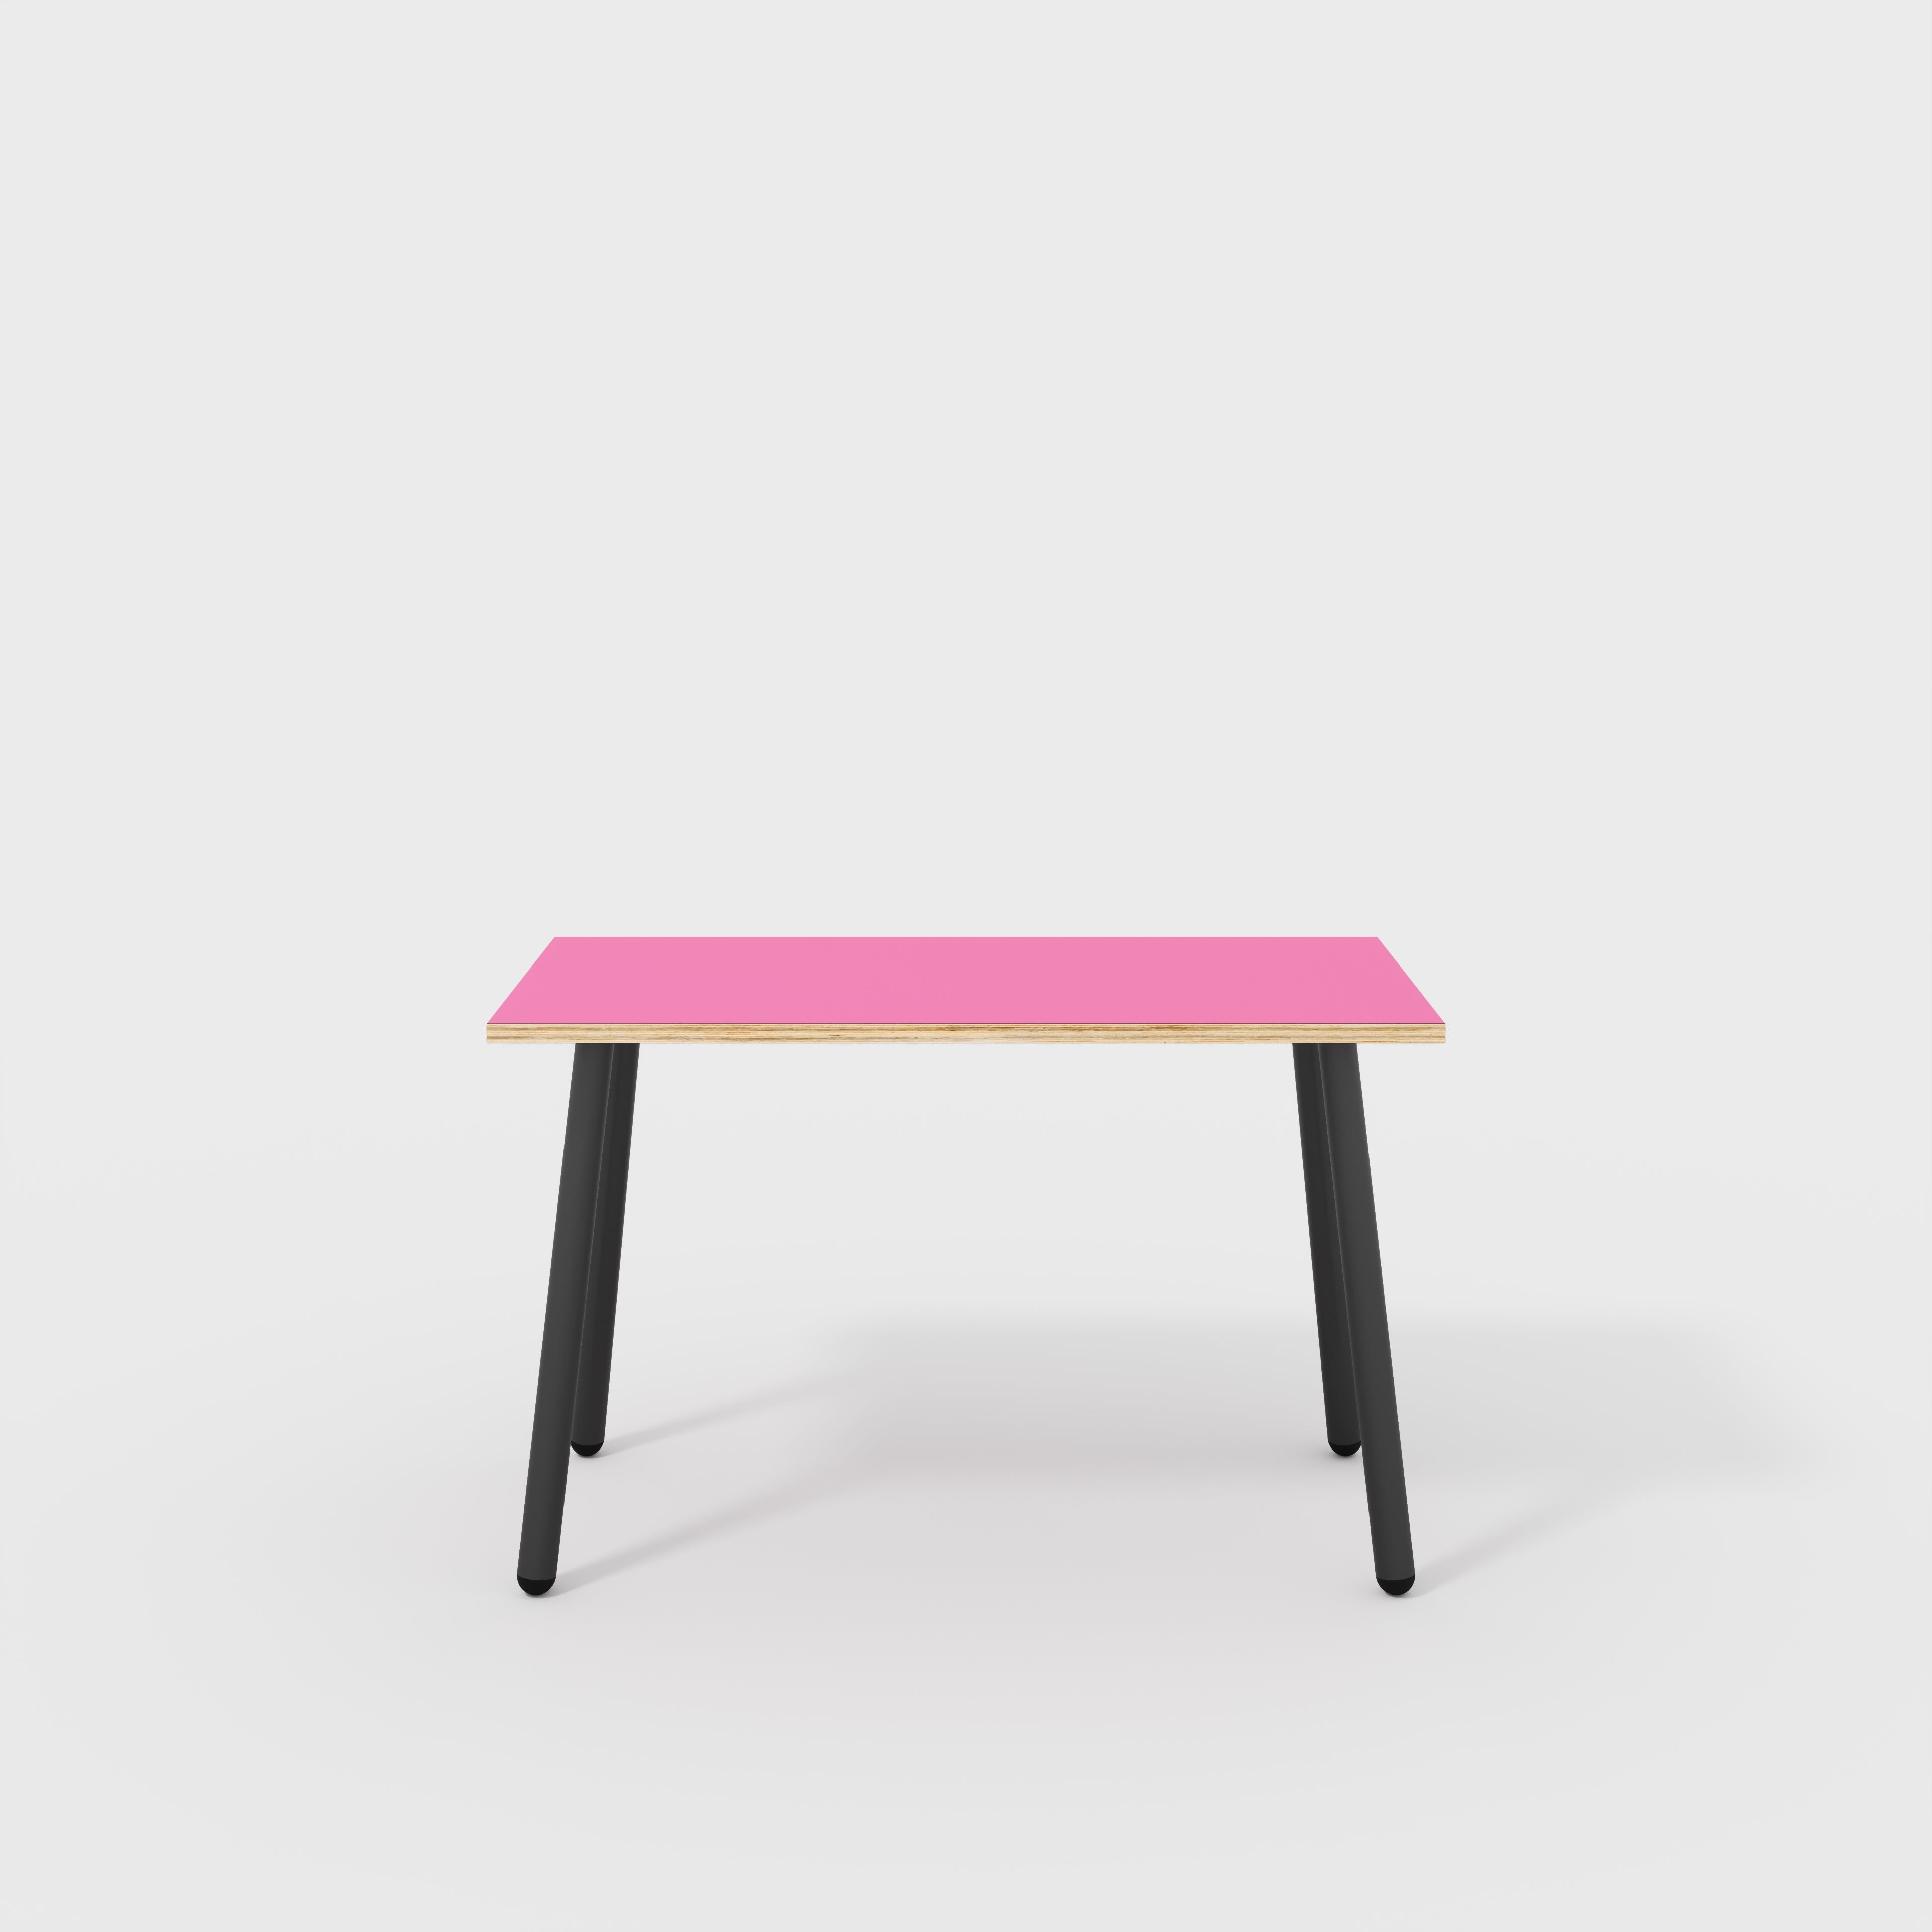 Desk with Black Round Single Pin Legs - Formica Juicy Pink - 1200(w) x 600(d) x 735(h)